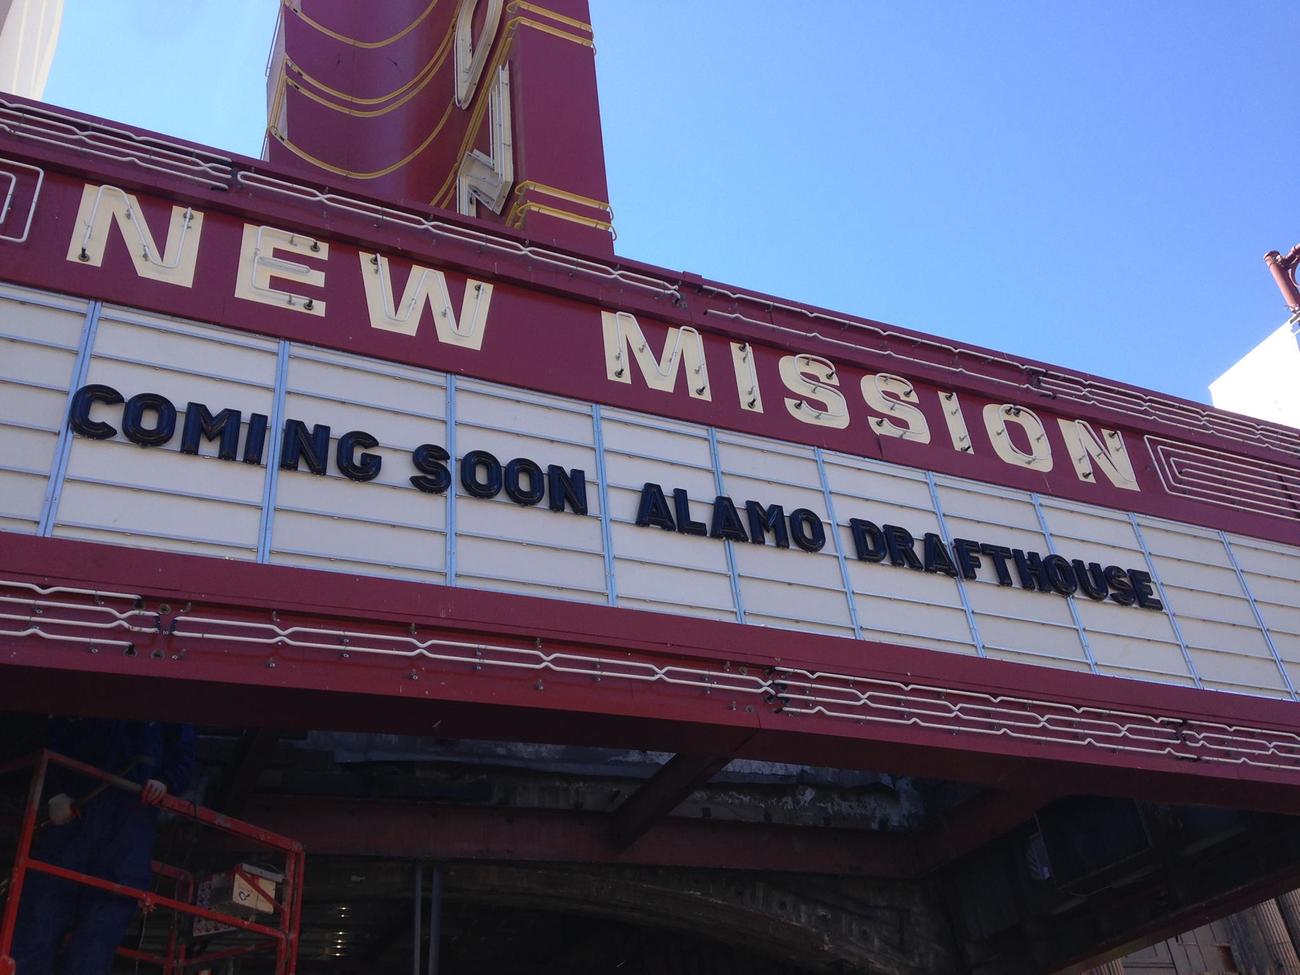 Alamo Drafthouse opens in San Francisco with Star Wars: Episode VII